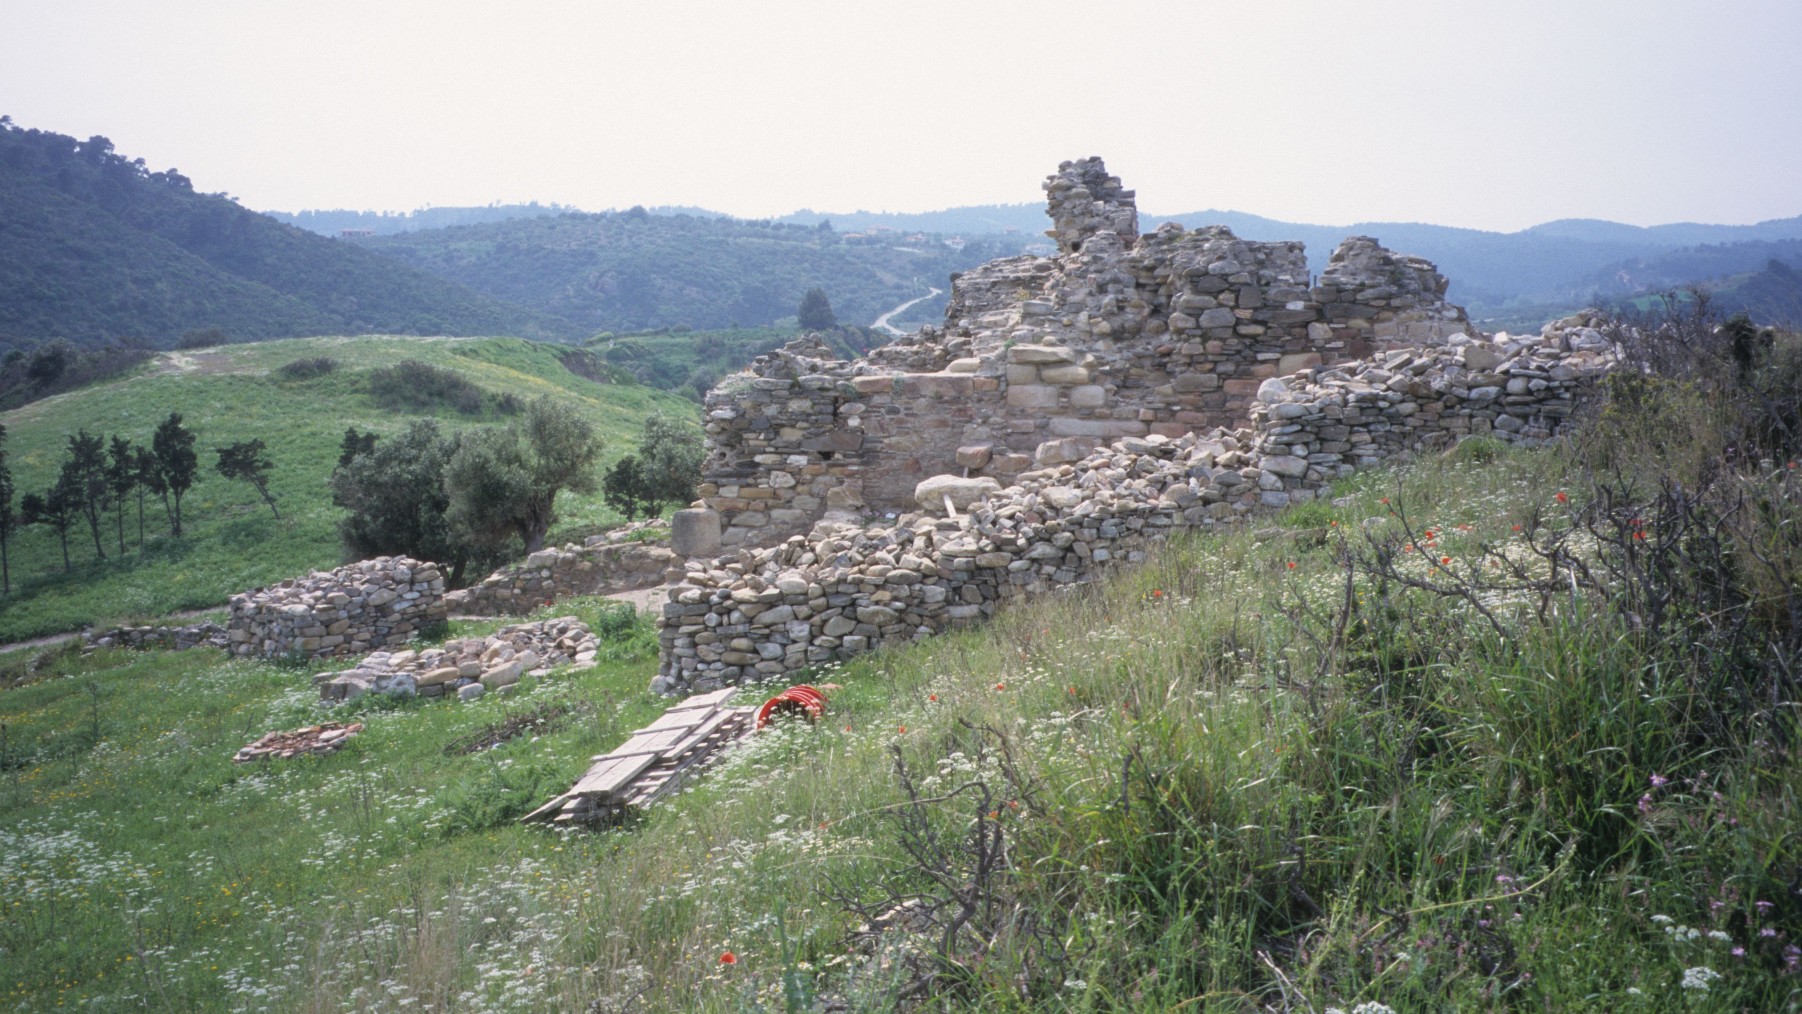 The ruins of the monastery are located in the middle of the three distinctive peninsulas of Halkidiki. Archaeologists believe it was destroyed by fire during a raid in the 14th century.